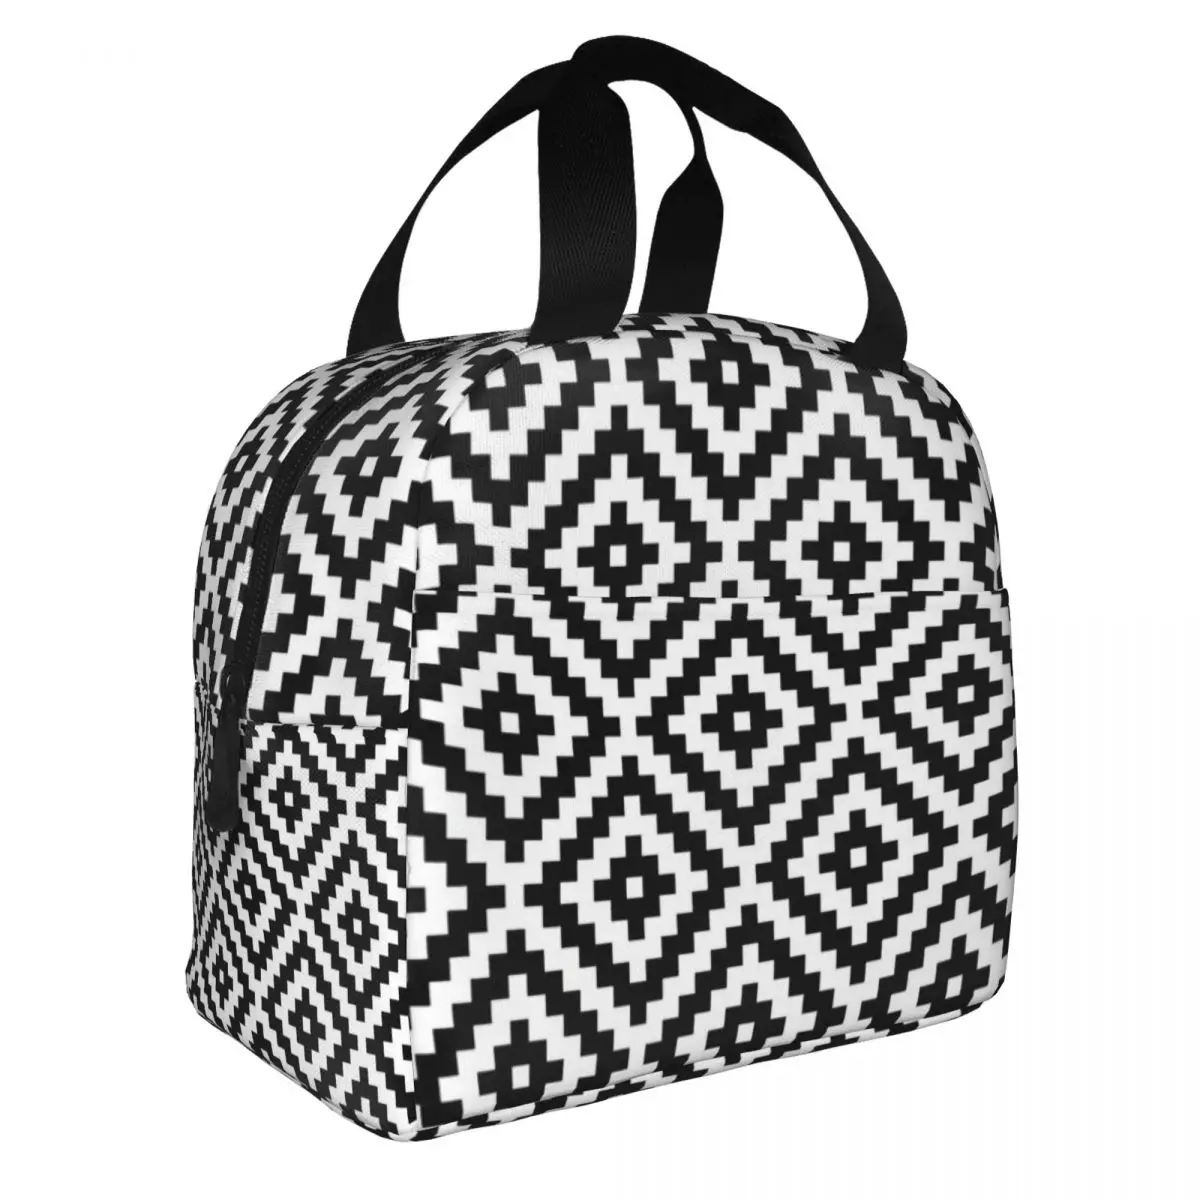 Aztec Symbol Block Ptn BW Lunch Bento Bags Portable Aluminum Foil thickened Thermal Cloth Lunch Bag for Women Men Boy